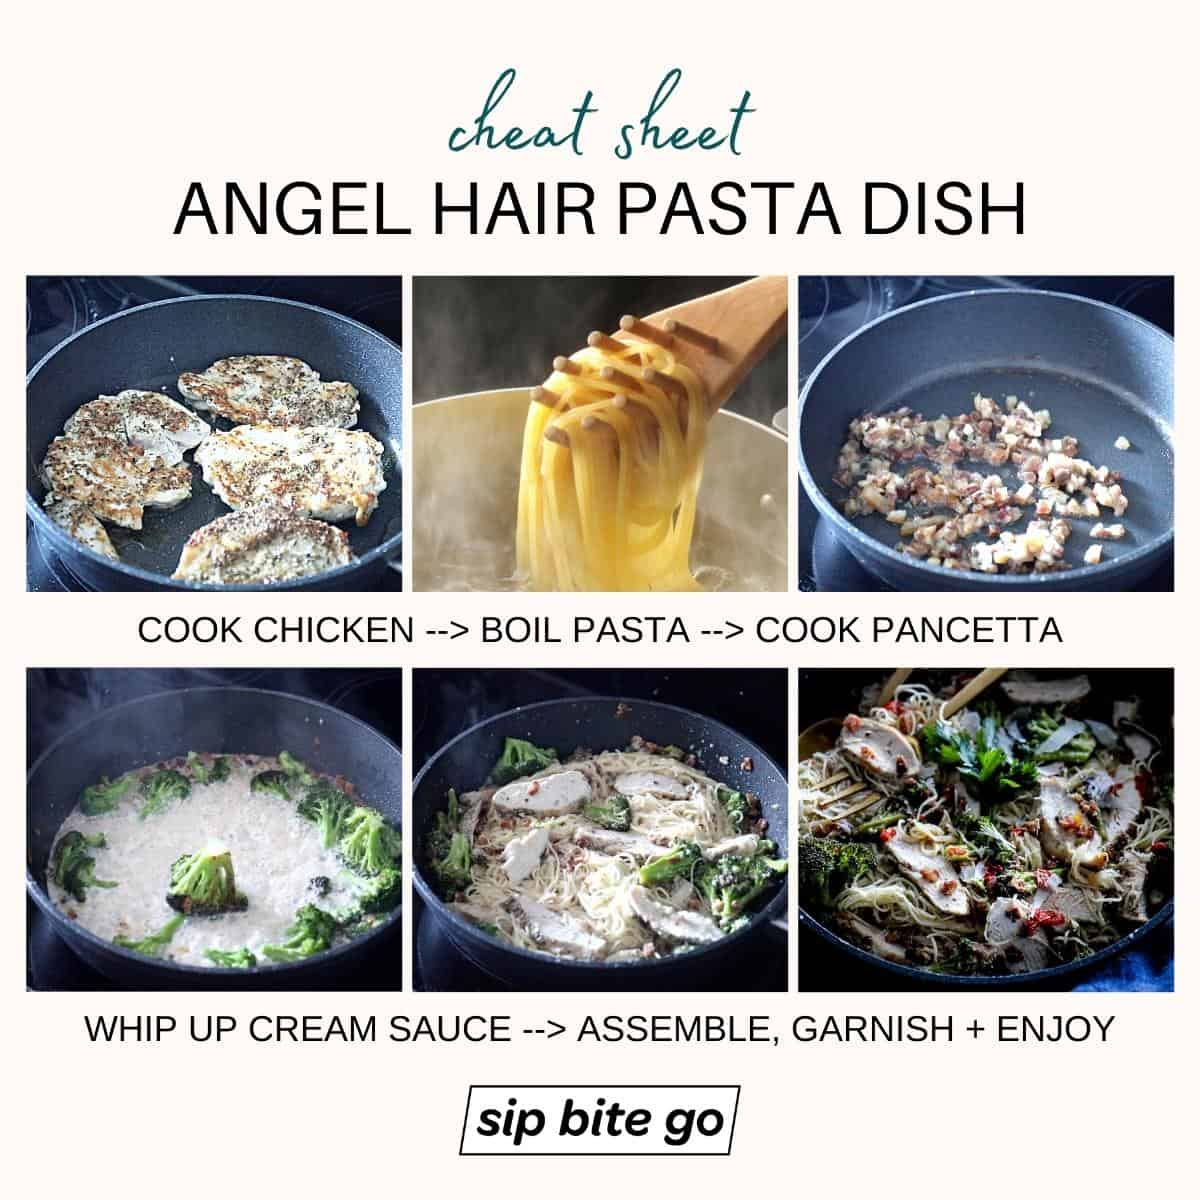 Infographic demonstrating Angel Hair Pasta with Chicken Broccoli Pancetta